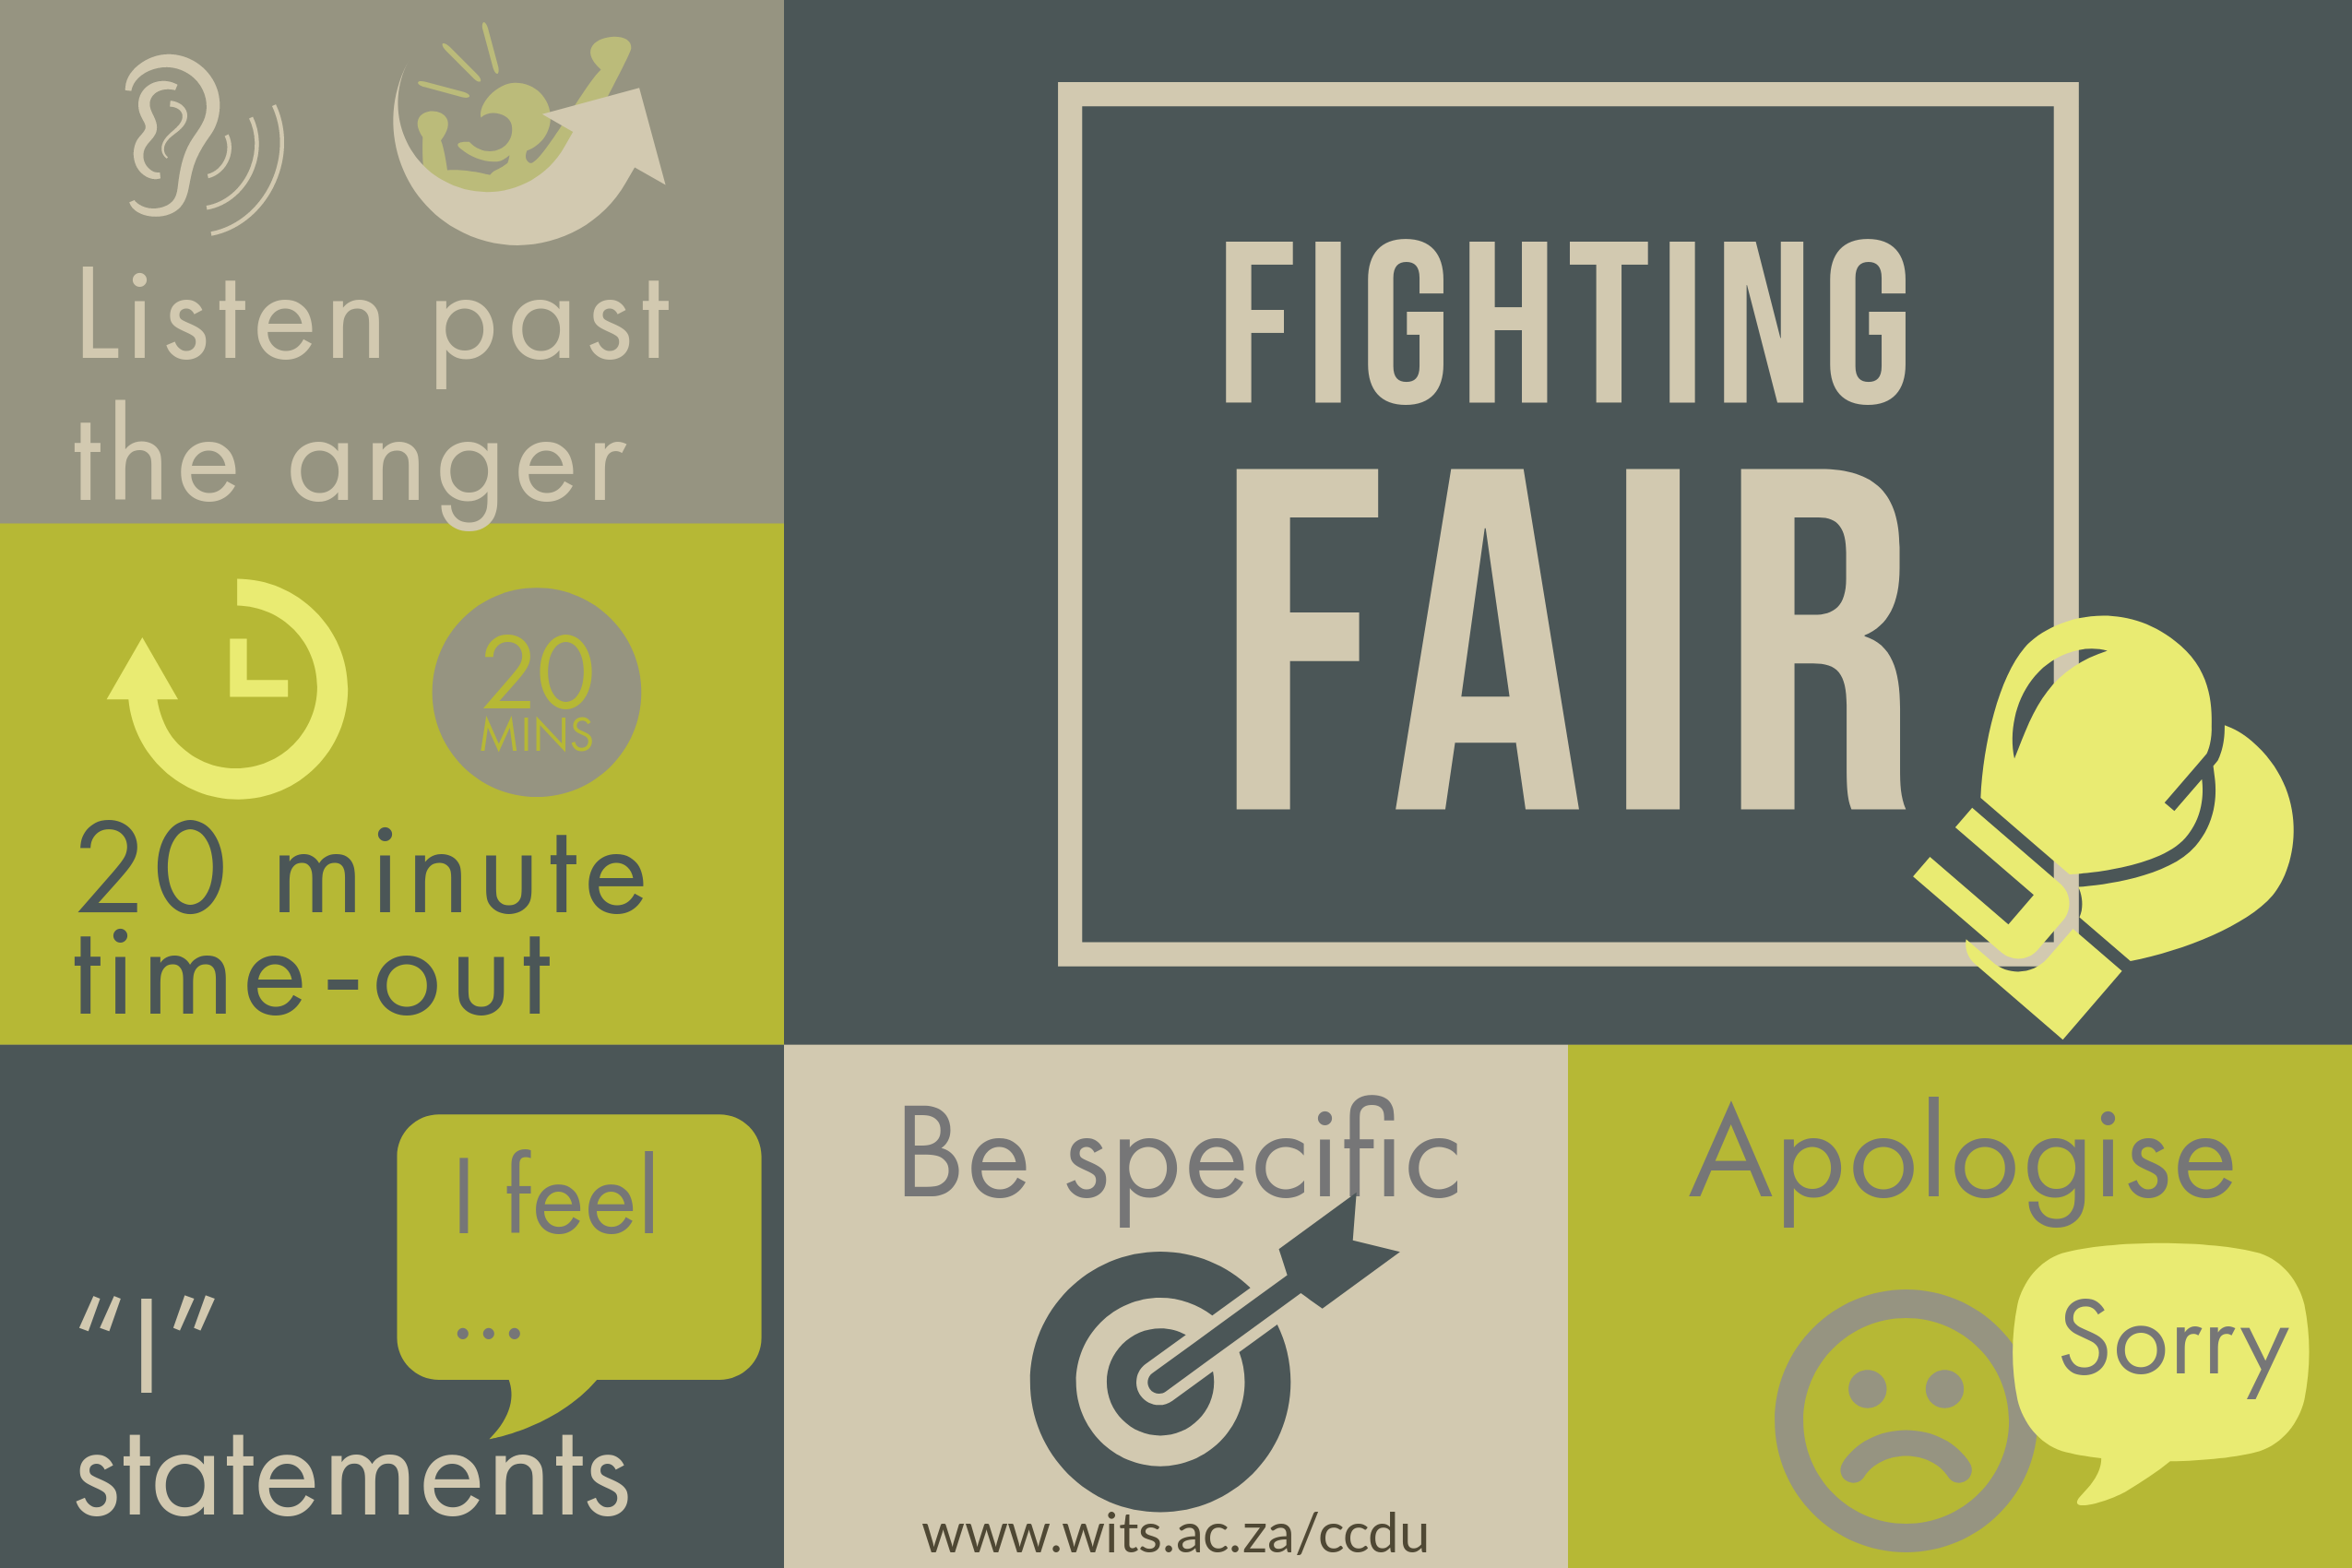 Infographics showing ways of fighting fair in relationships